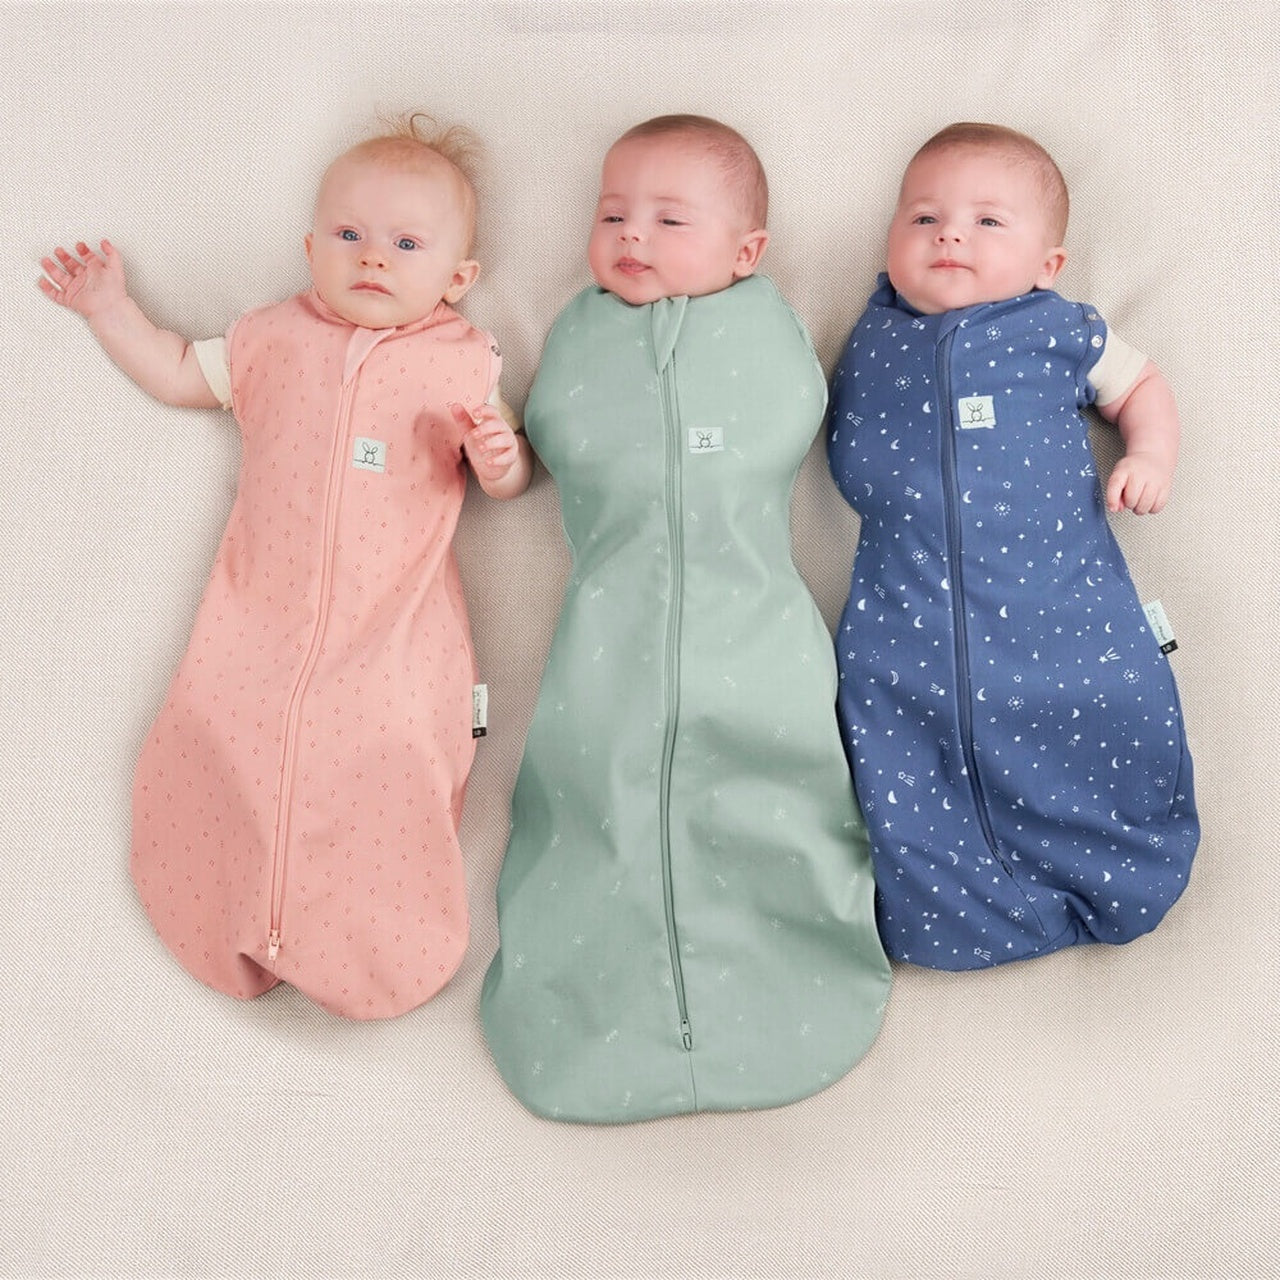 Night Sky Cocoon Swaddle 1.0 Tog